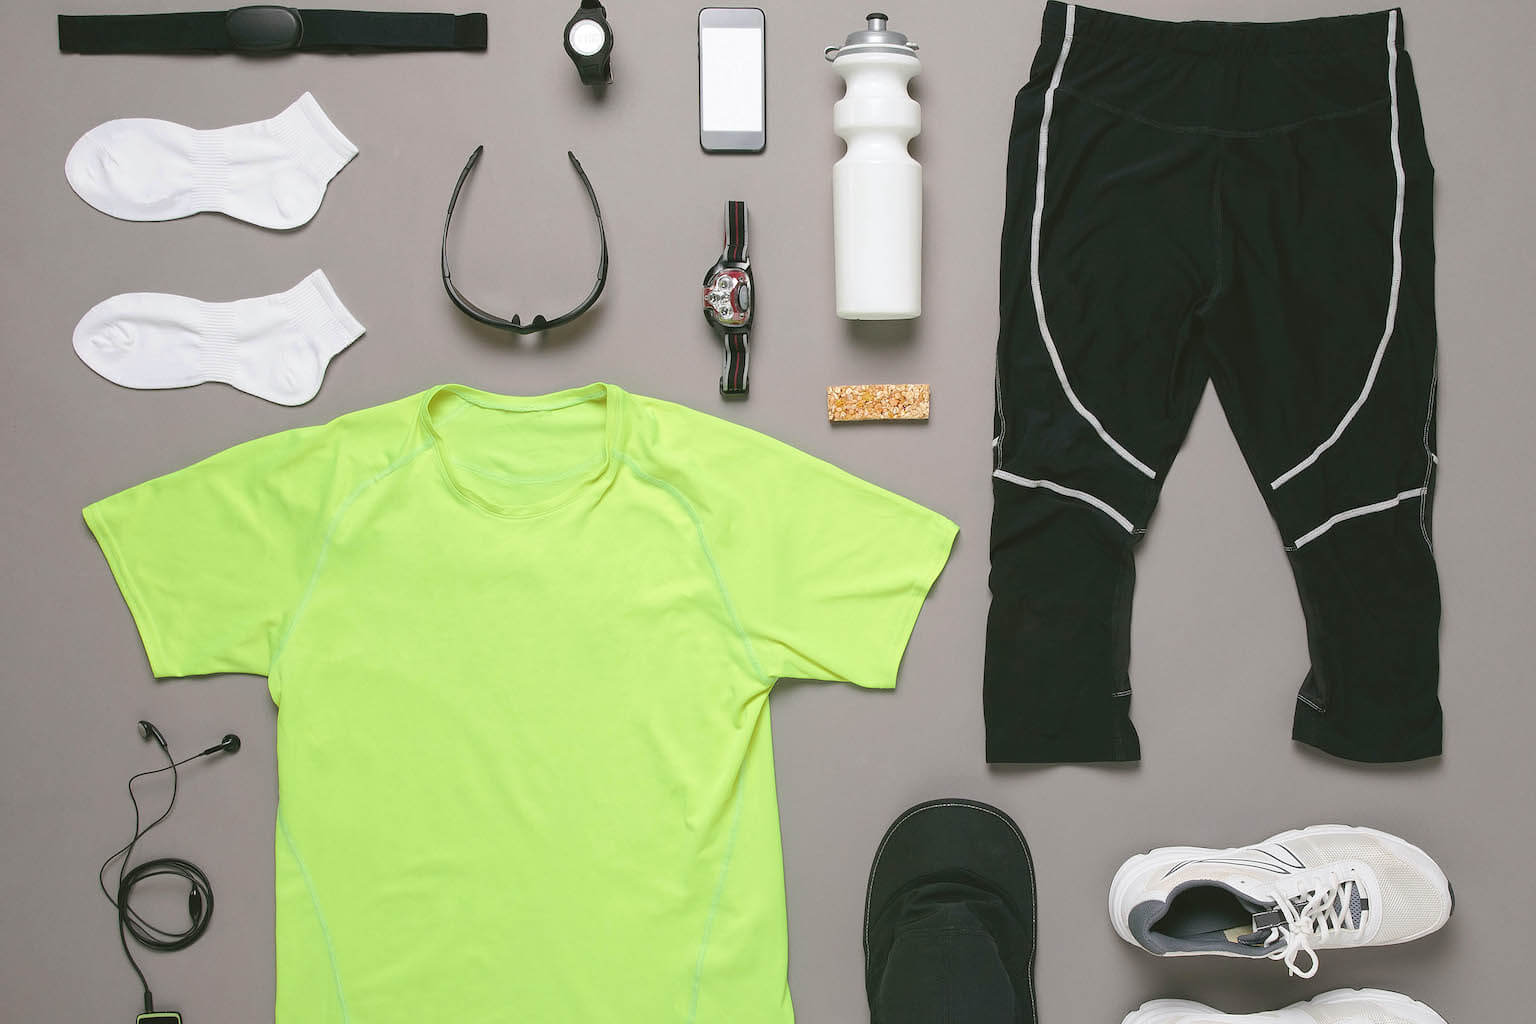 Flat lay of jogging attire and accessories including a neon green t-shirt, black track pants, sneakers, headphones, a smartwatch, a water bottle, and a nutrition bar on a gray background.